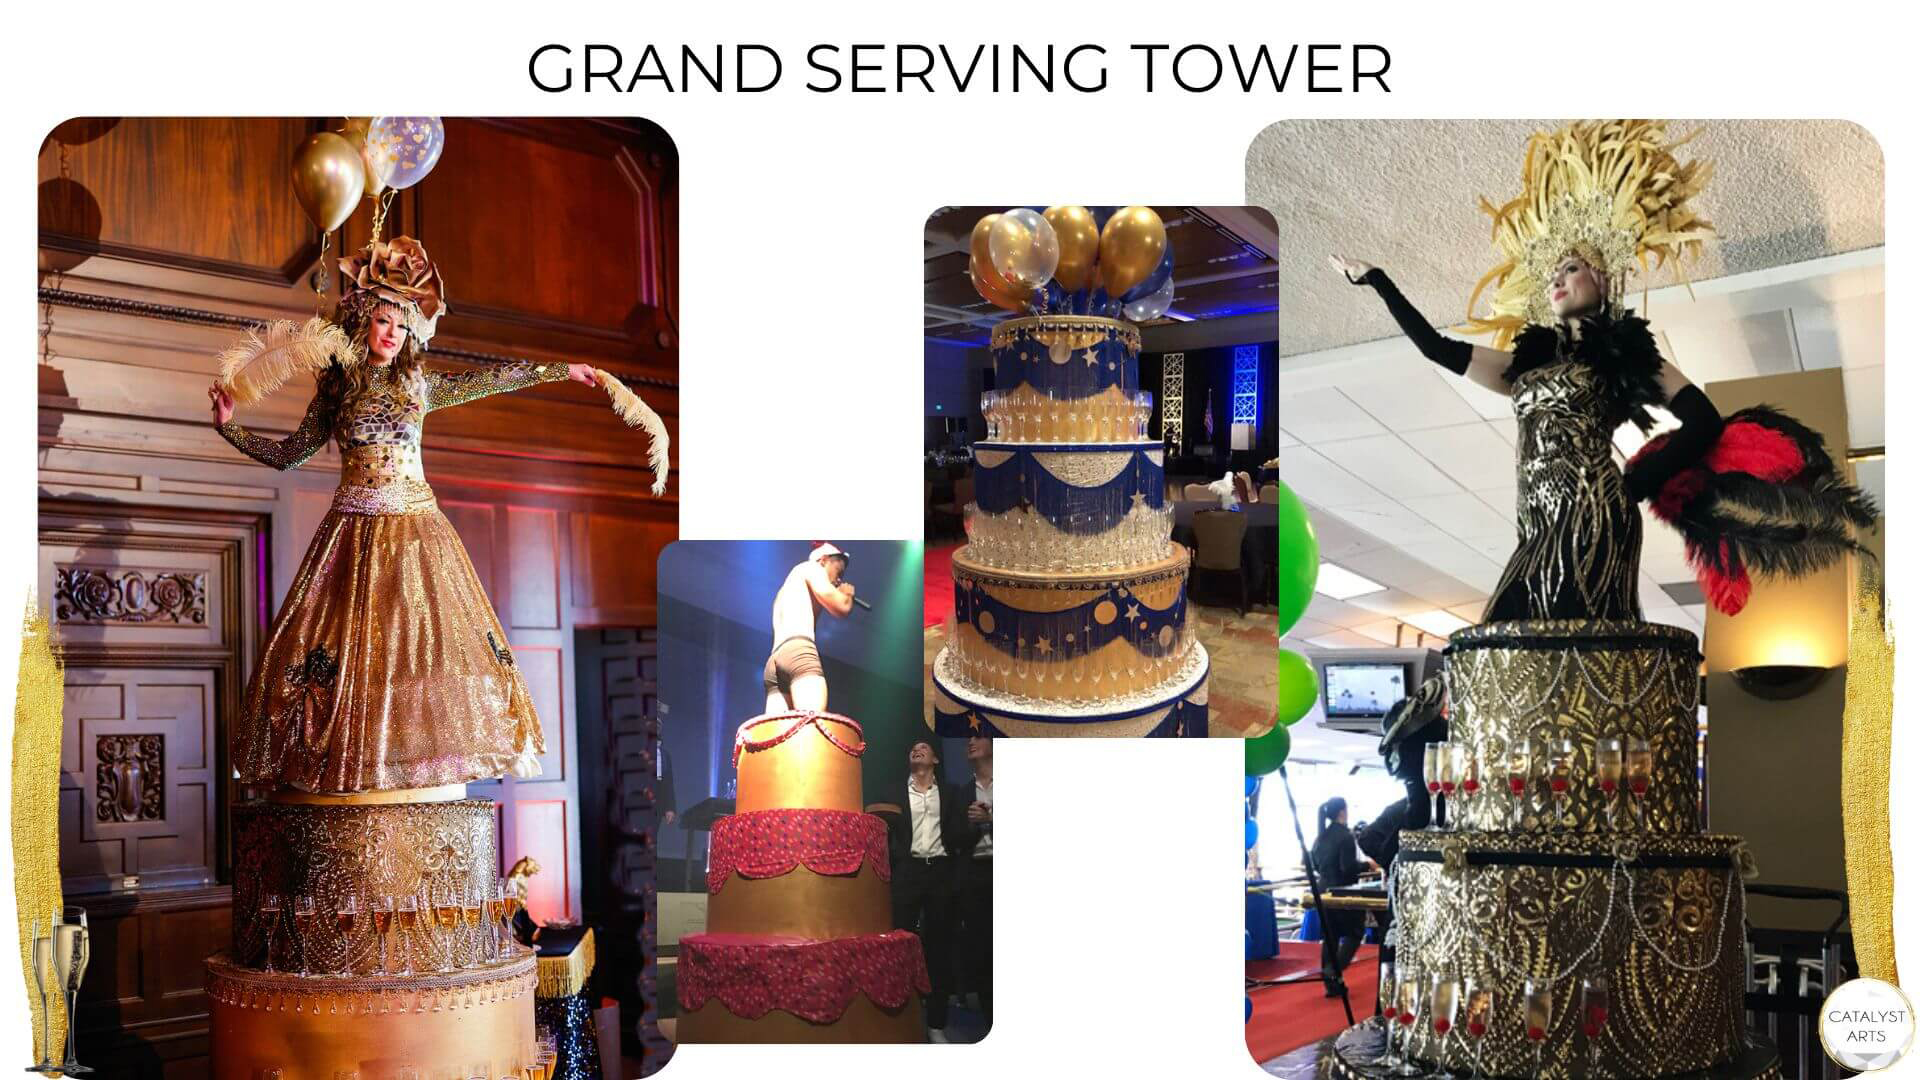 Grand Serving Tower, Giant Cake, Champgne Tower by Catalyst Arts 